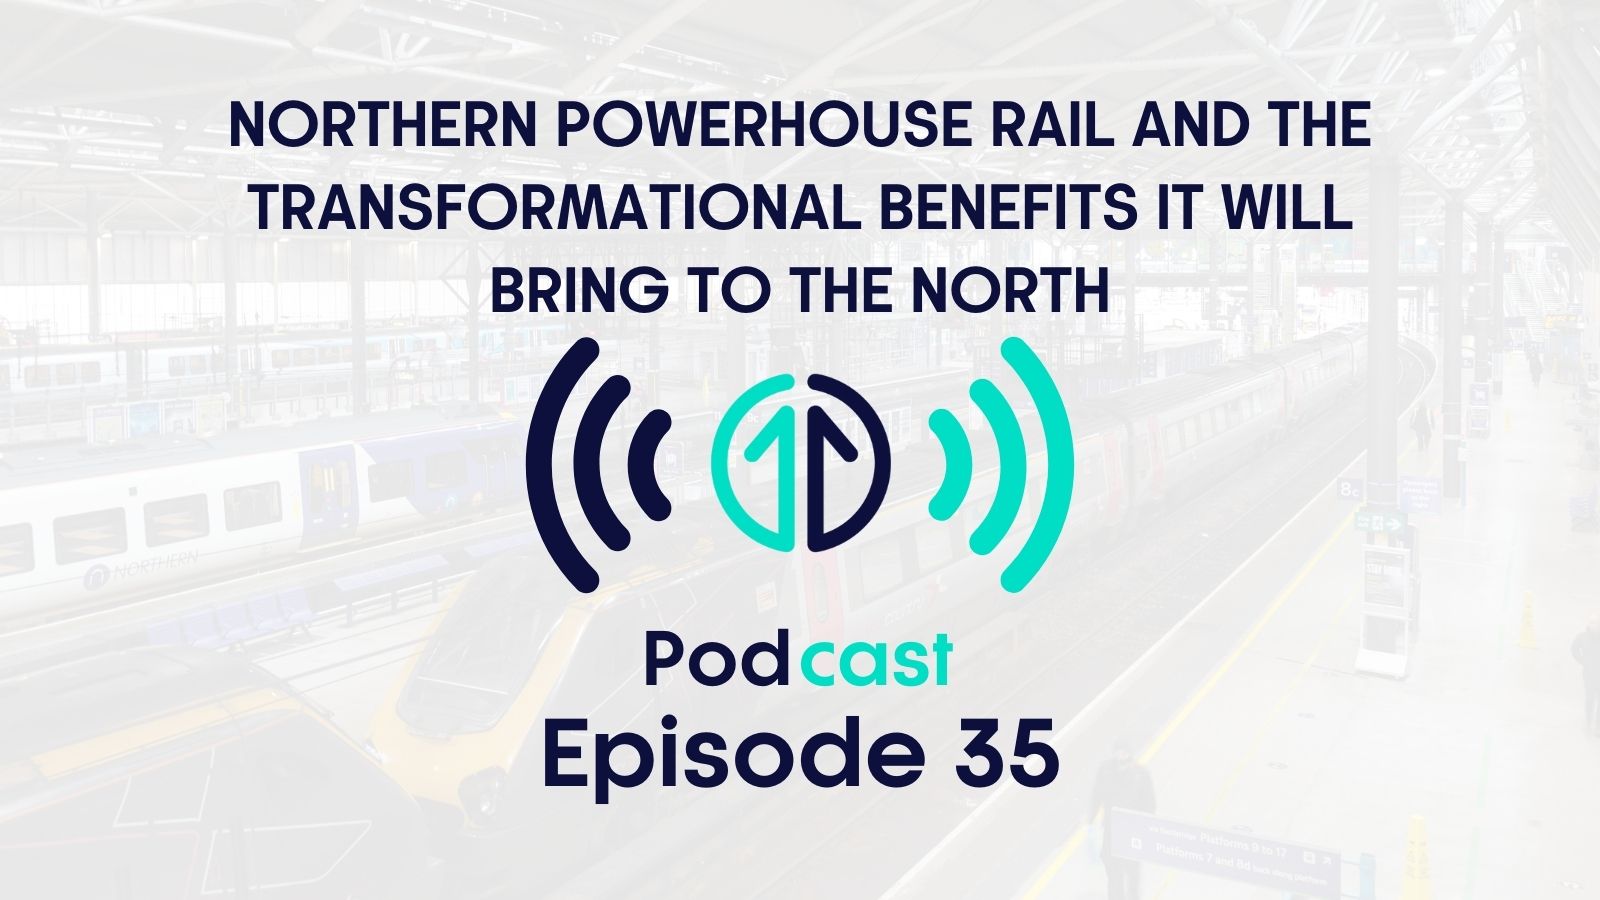 Northern Powerhouse Rail and the transformational benefits it will bring to the North podcast